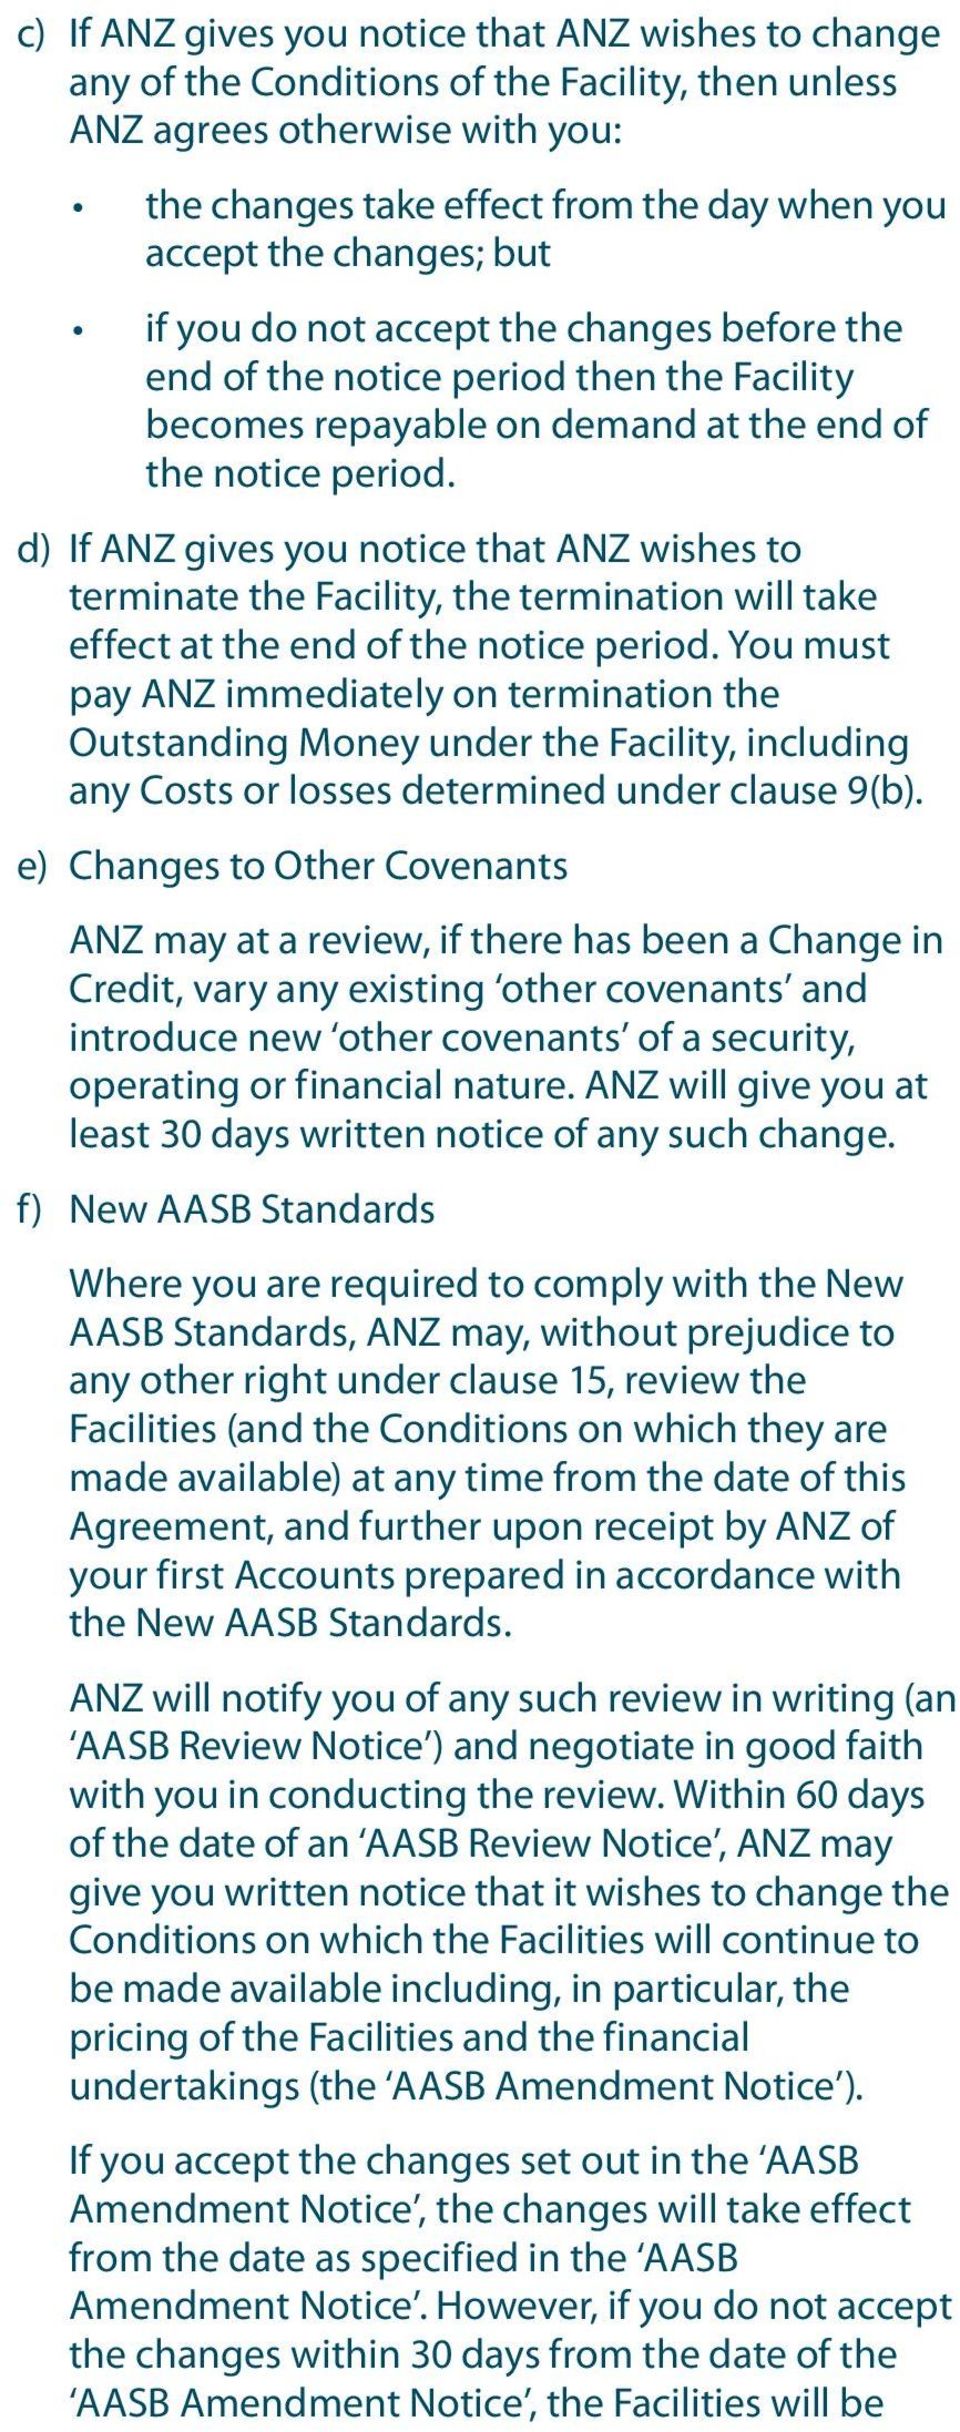 d) If ANZ gives you notice that ANZ wishes to terminate the Facility, the termination will take effect at the end of the notice period.